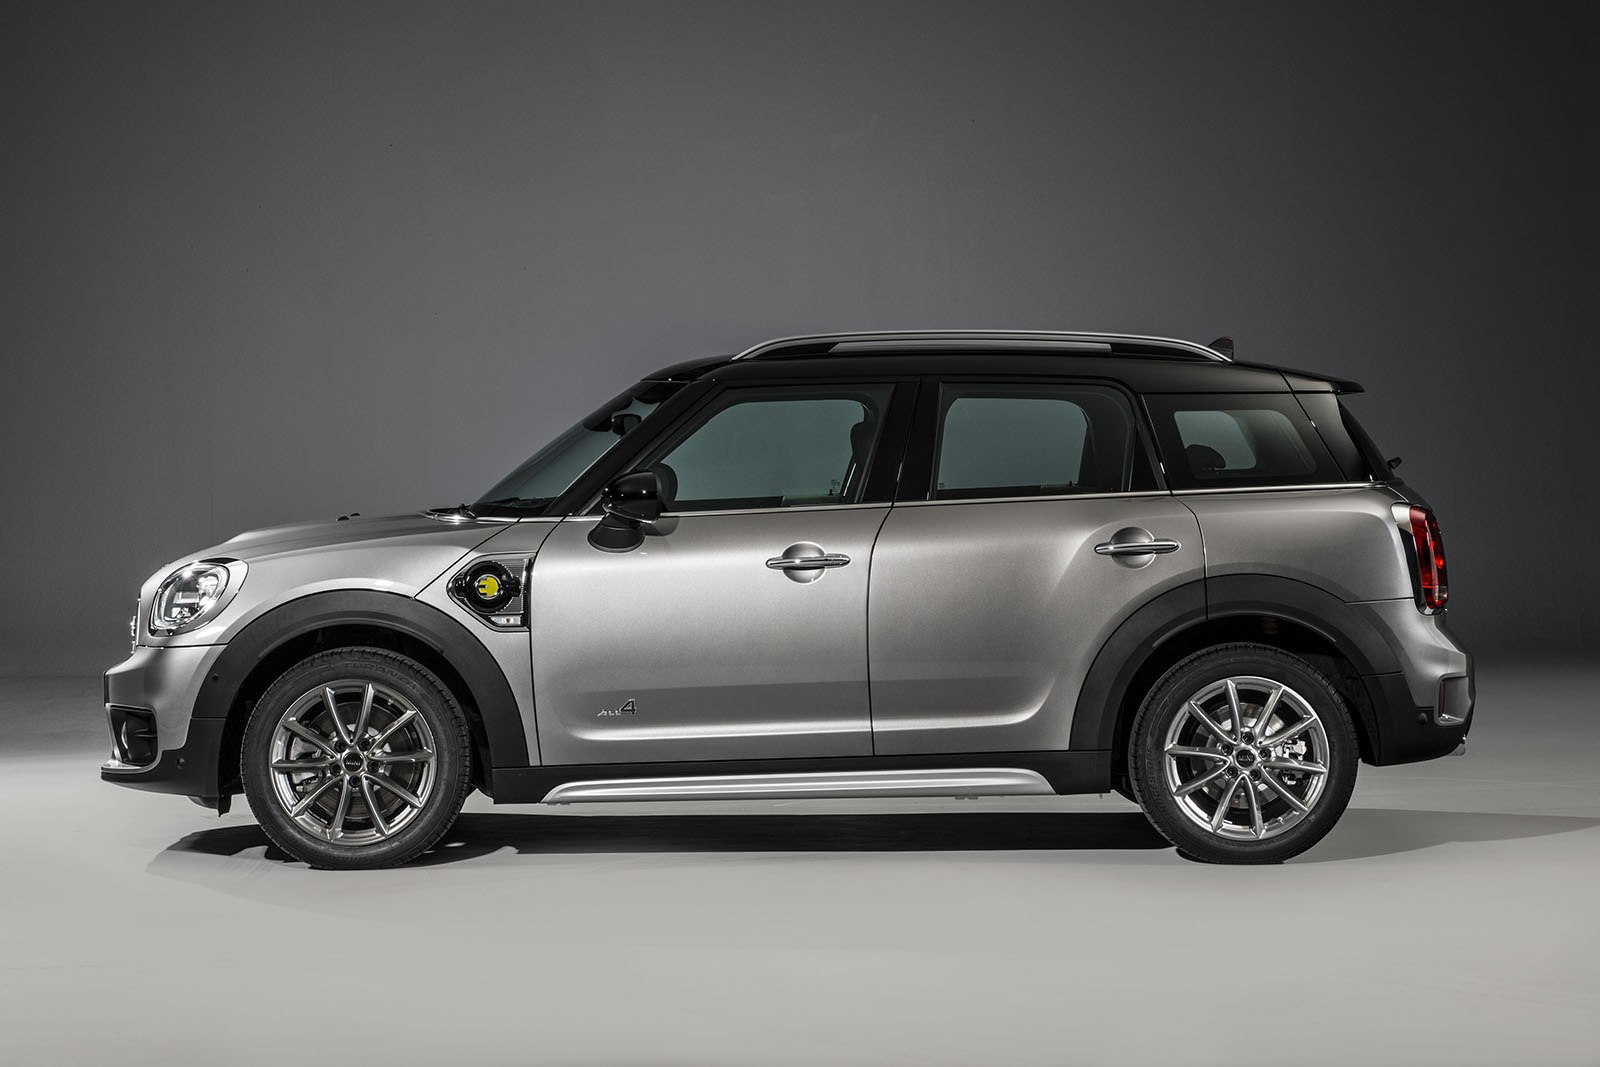 2017 MINI Countryman - The Technical Specifications - MotoringFile